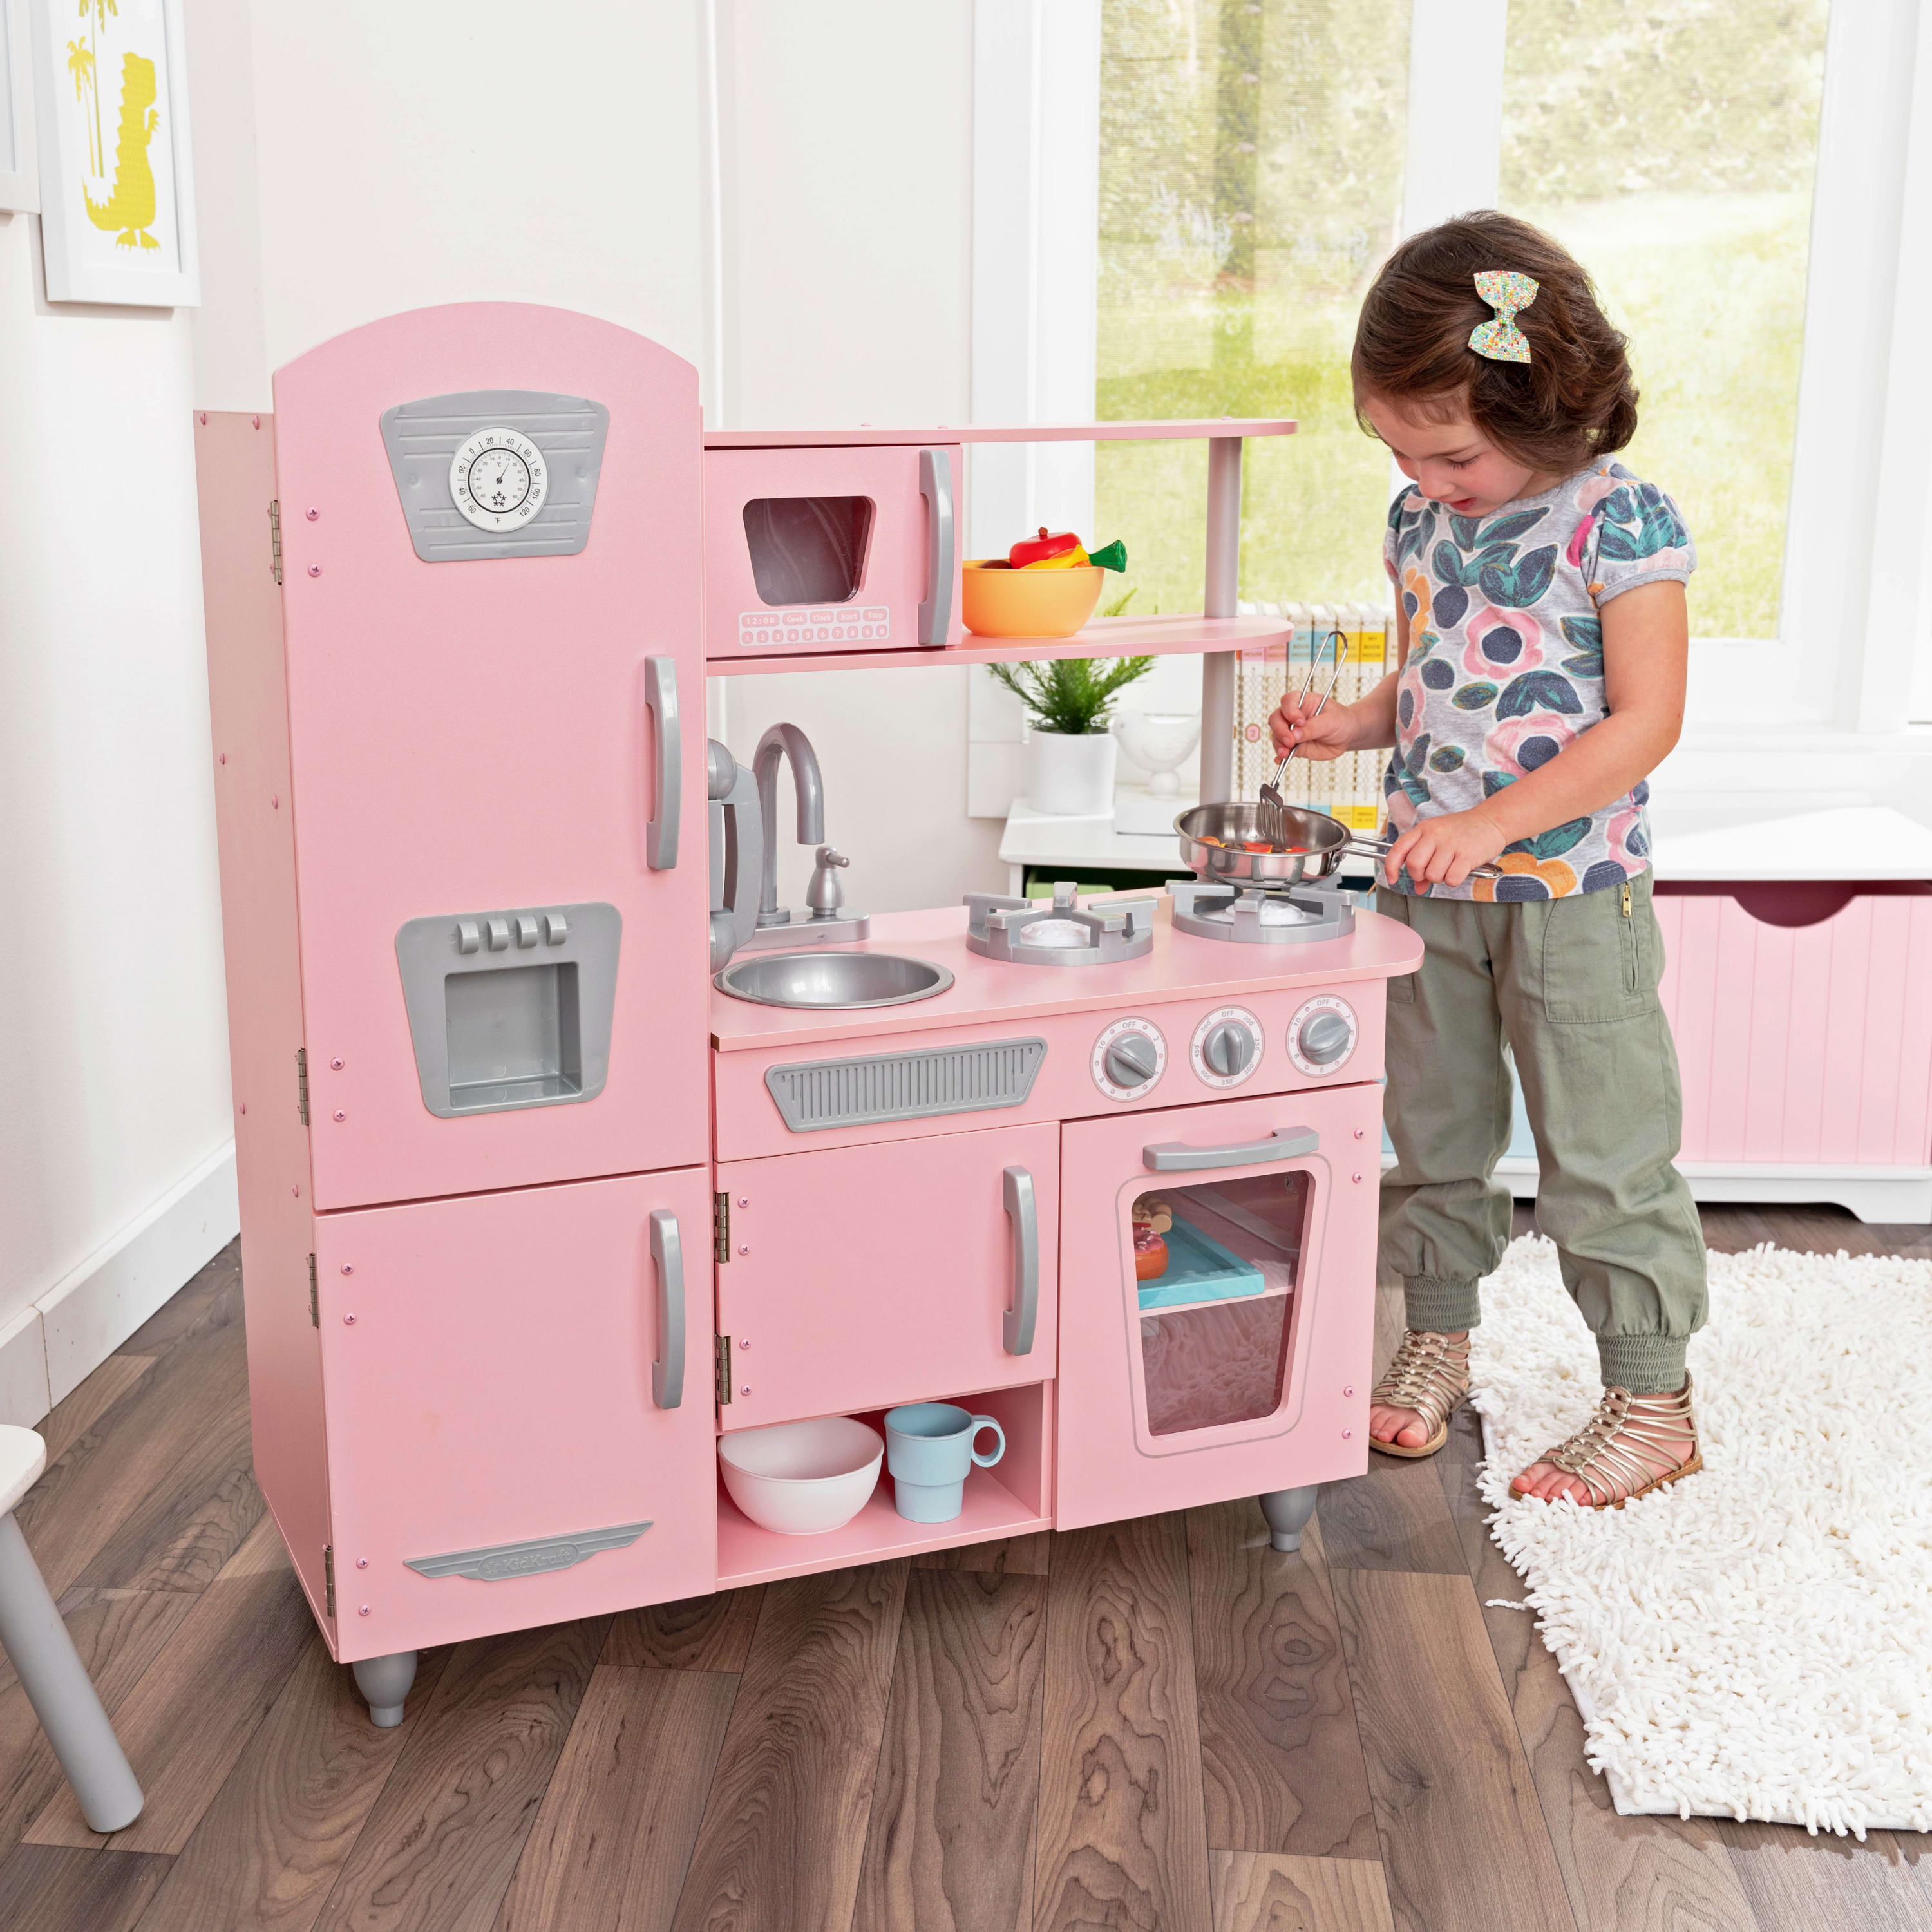 KidKraft Pink Vintage Wooden Play Kitchen with Pretend Ice Maker and Play Phone - image 2 of 11